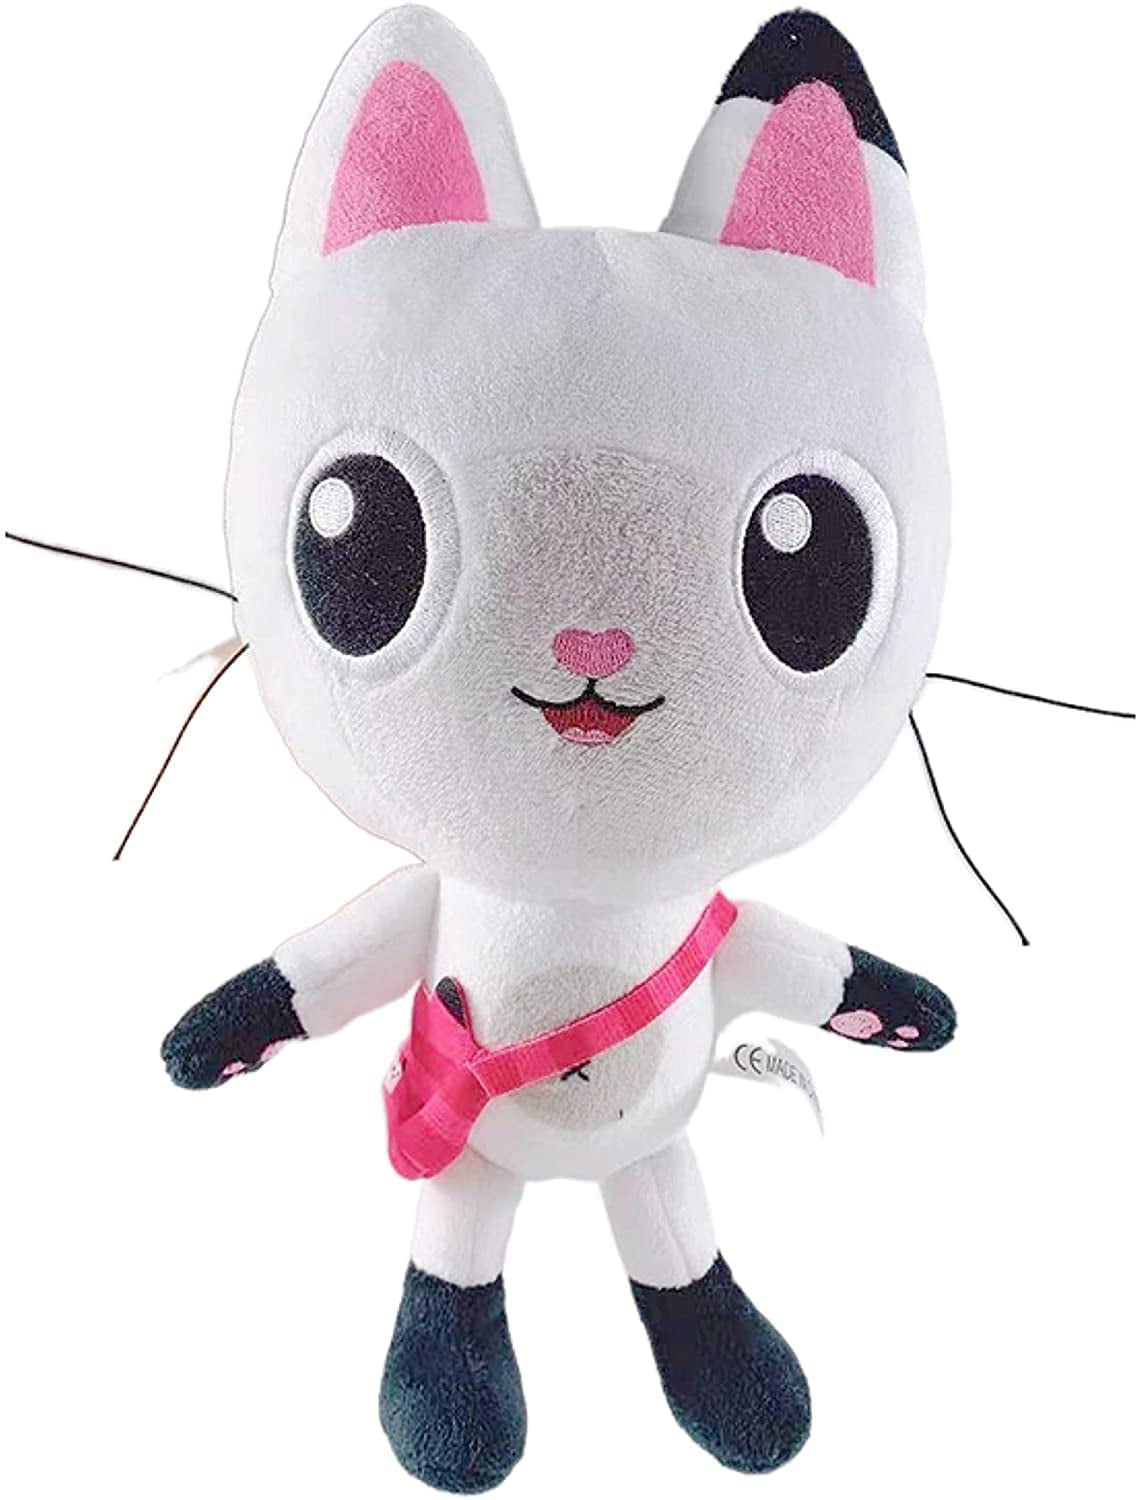 2 Pcs D Purr-ific Plush Toy Kids Toys for Ages 4 and Up. 